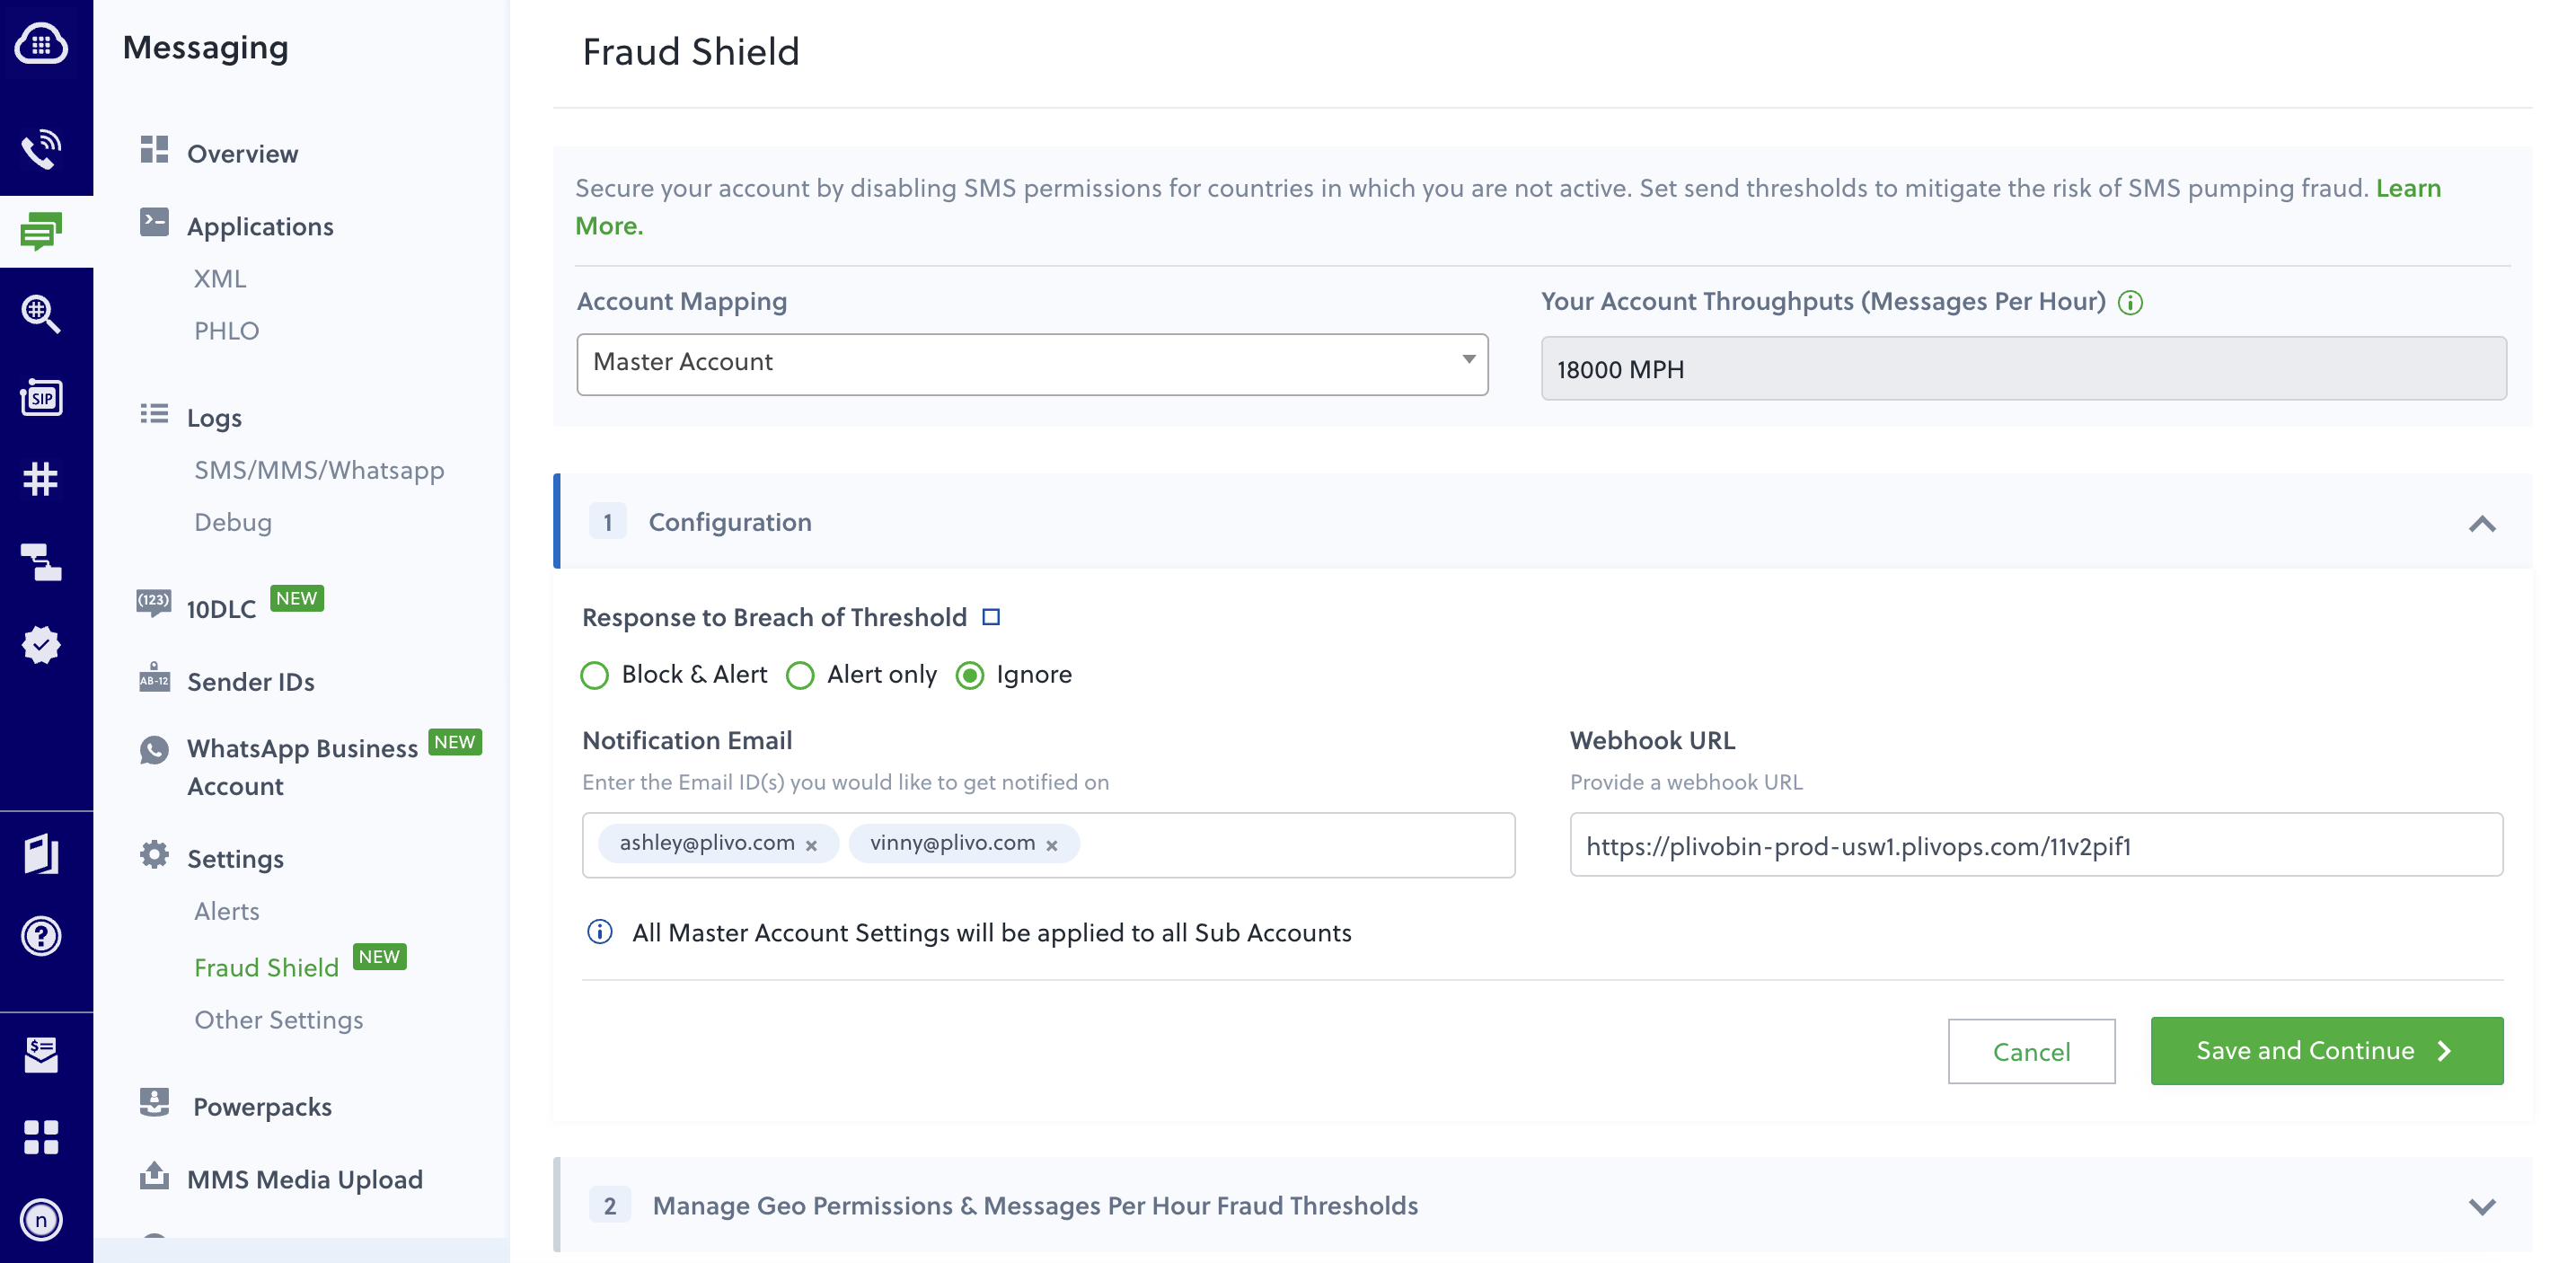 How to configure Fraud Shield